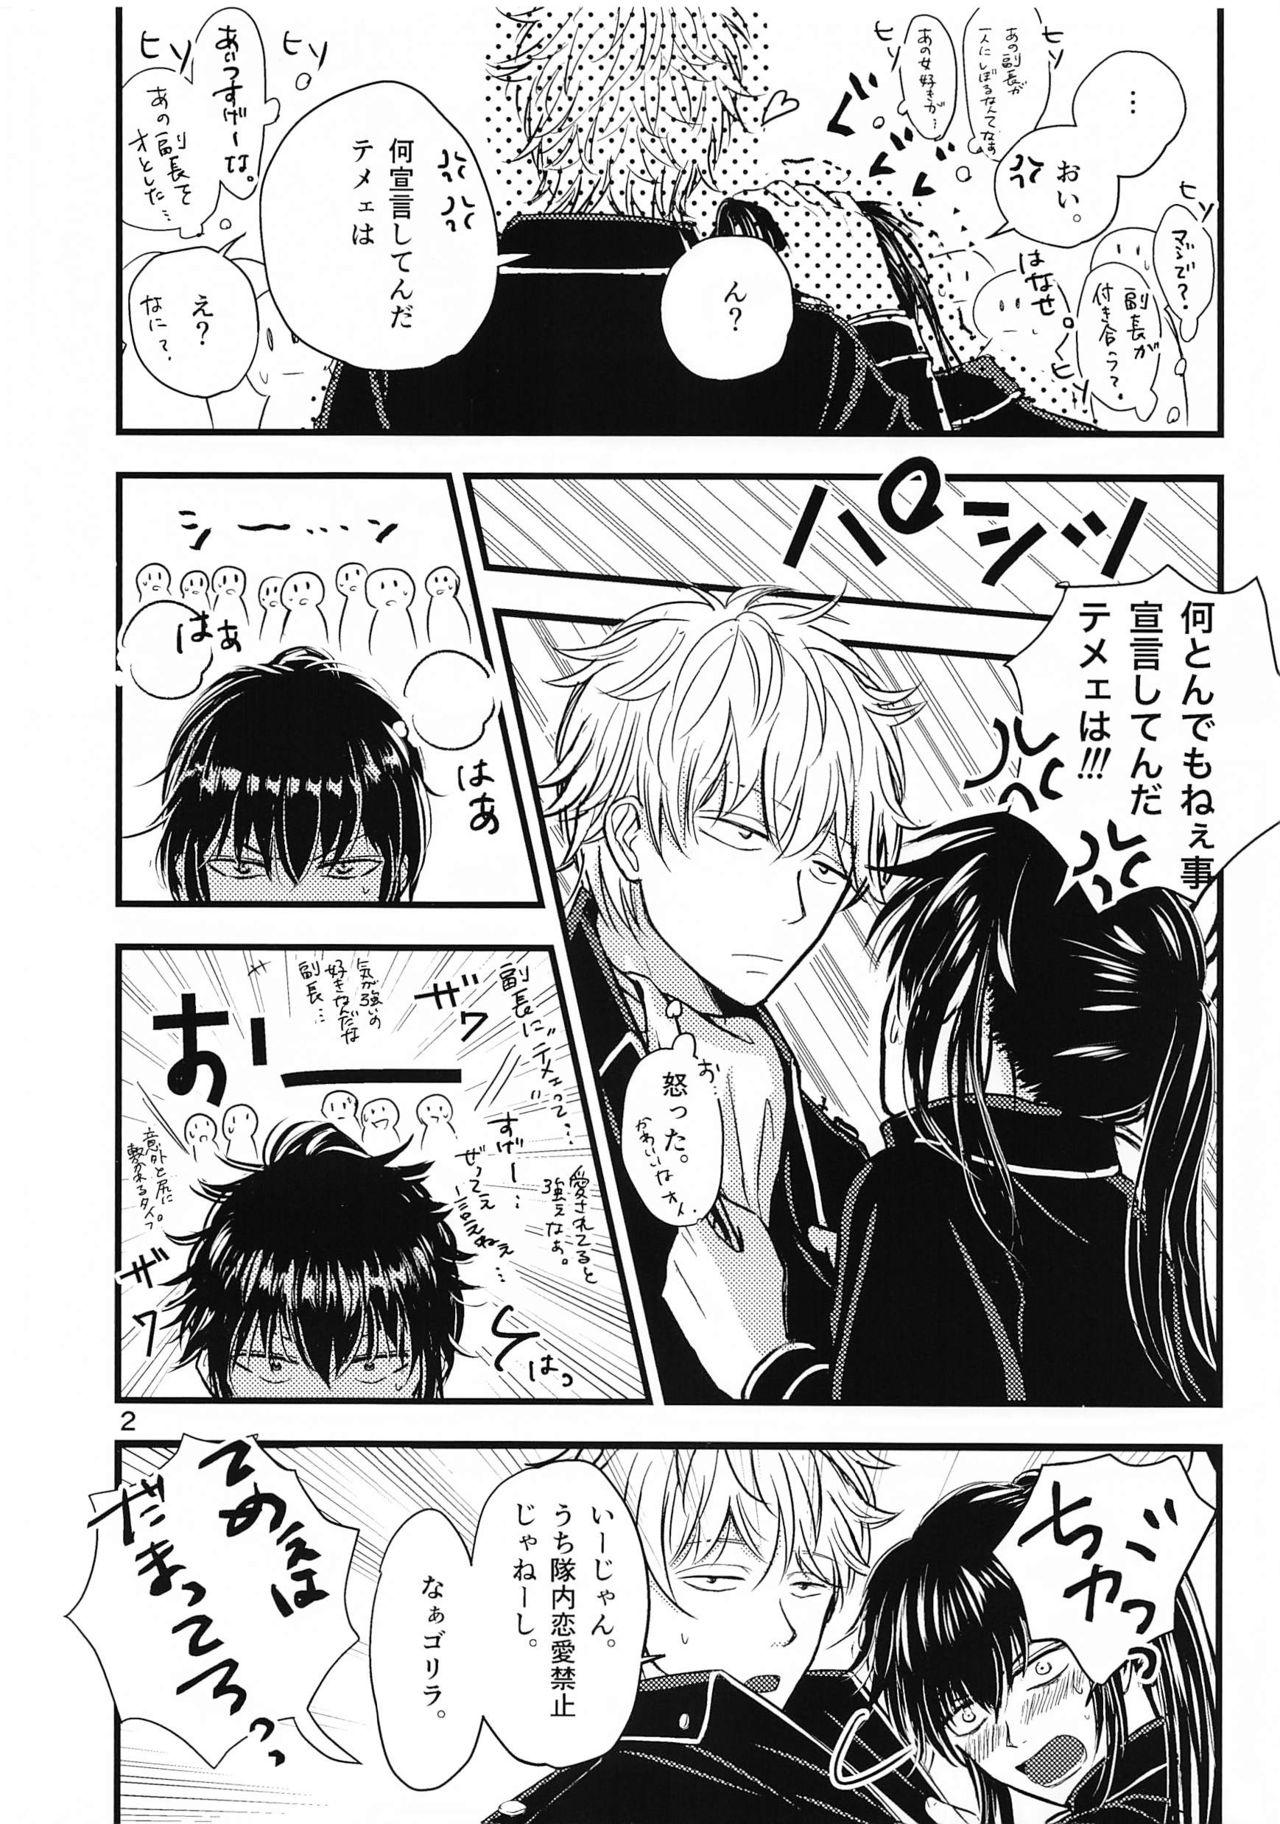 Best Blowjob unconditional love - Gintama Assfucking - Page 48